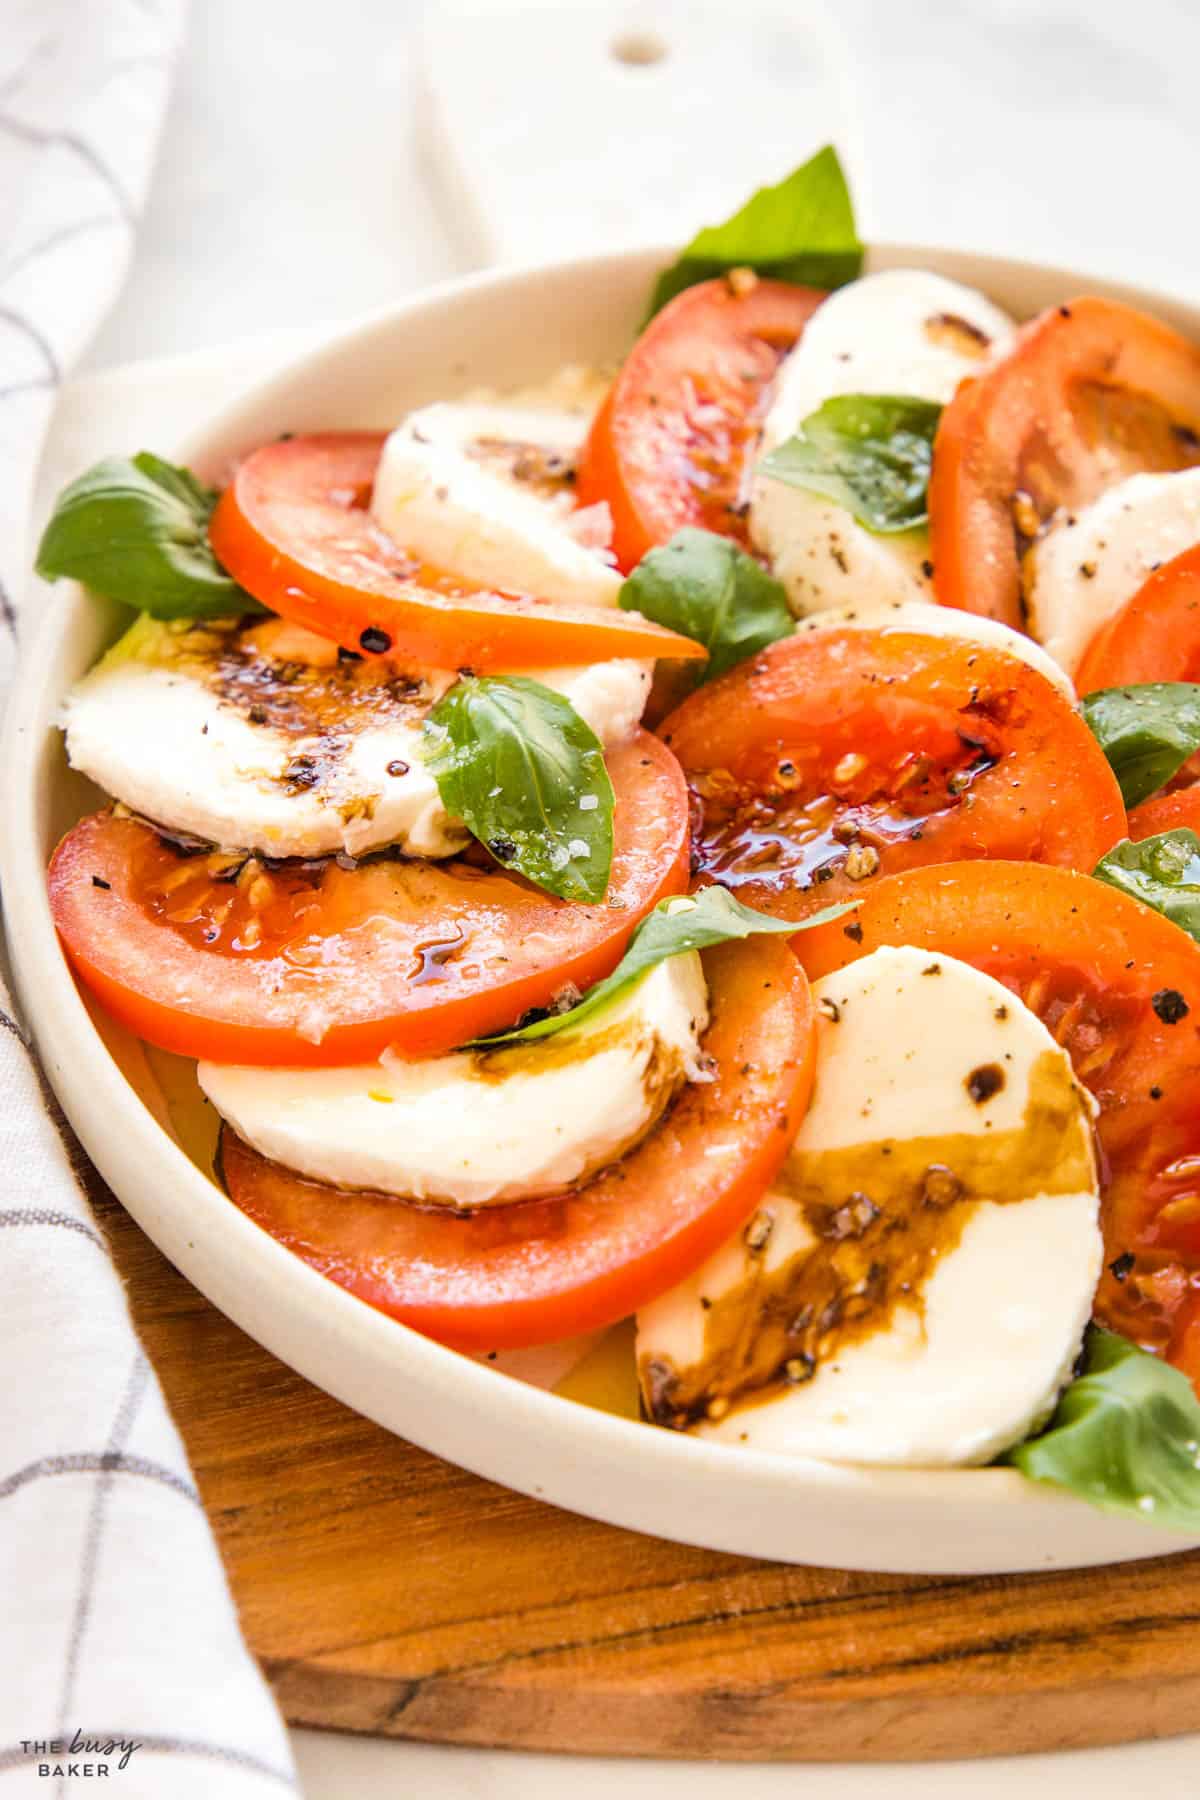 caprese salad recipe with tomatoes, mozzarella, basil, olive oil, balsamic and pepper